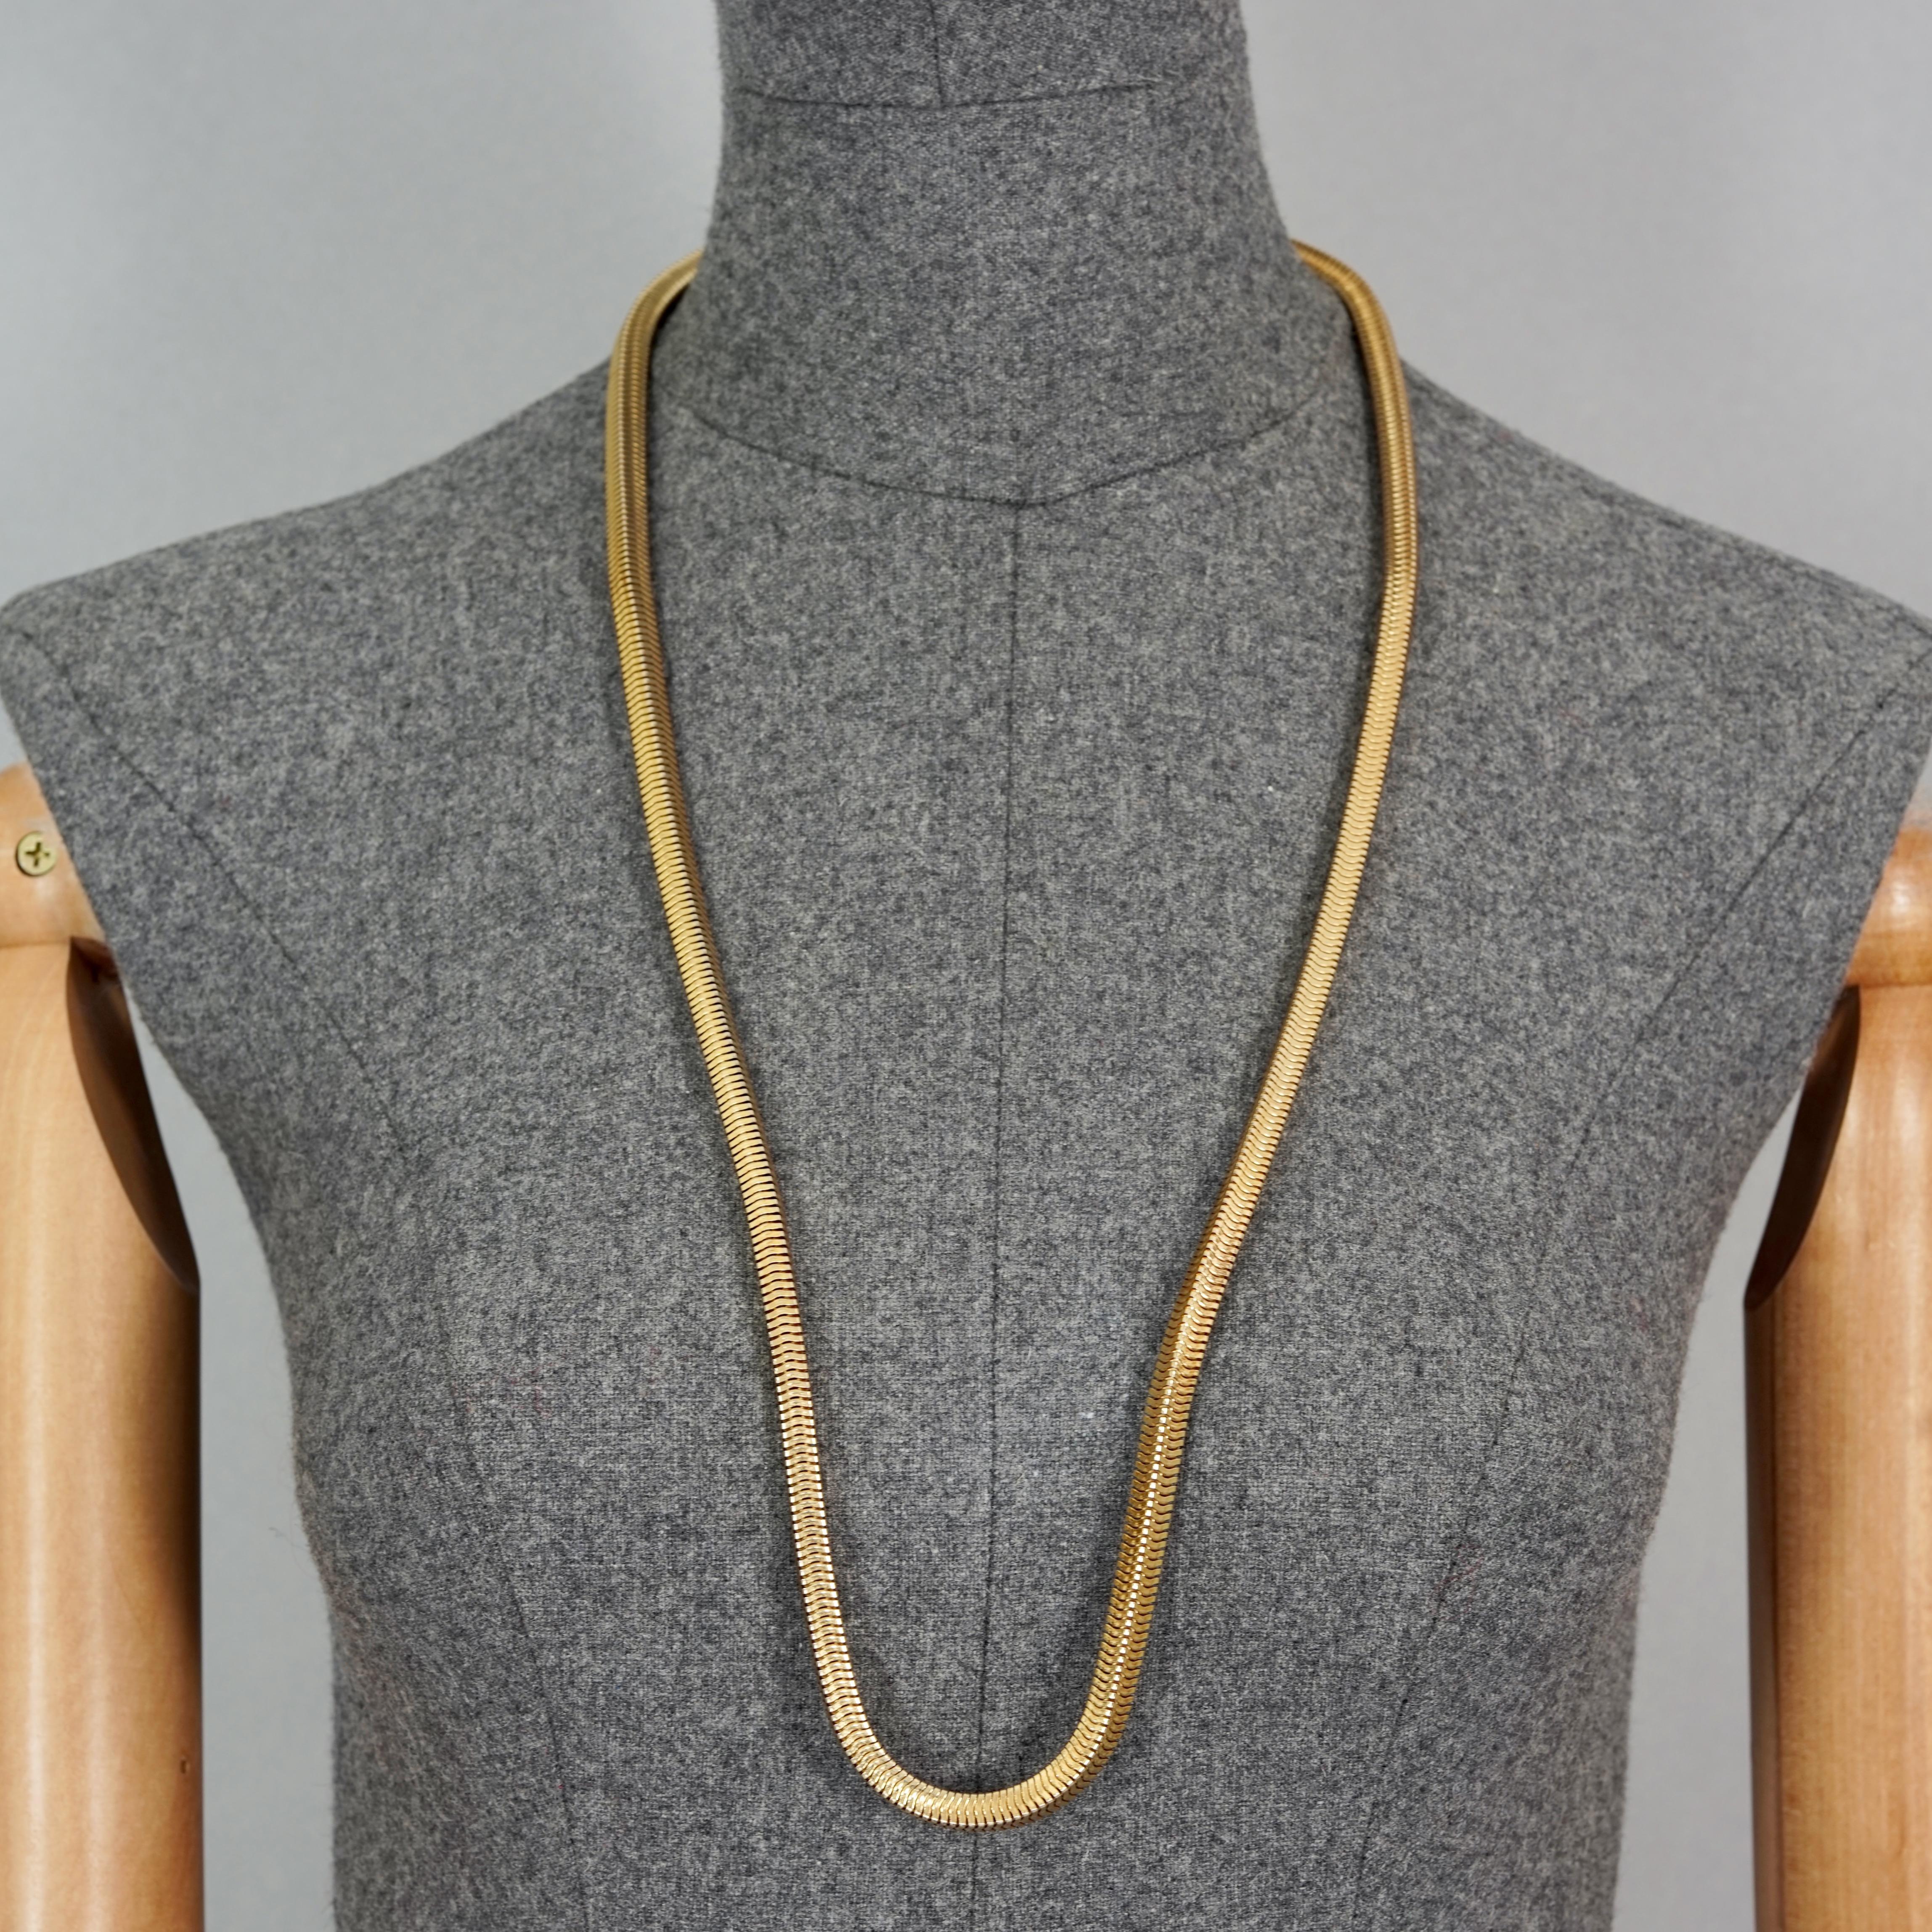 Vintage 1973 CHRISTIAN DIOR Gold Snake Chain Necklace

Measurements:
Height: 0.23 inch (0.6 cm)
Wearable Length: 32.28 inches (82 cm)

Features:
- 100% Authentic CHRISTIAN DIOR.
- Long snake chain necklace.
- Gold tone hardware.
- Signed 1973 CHR